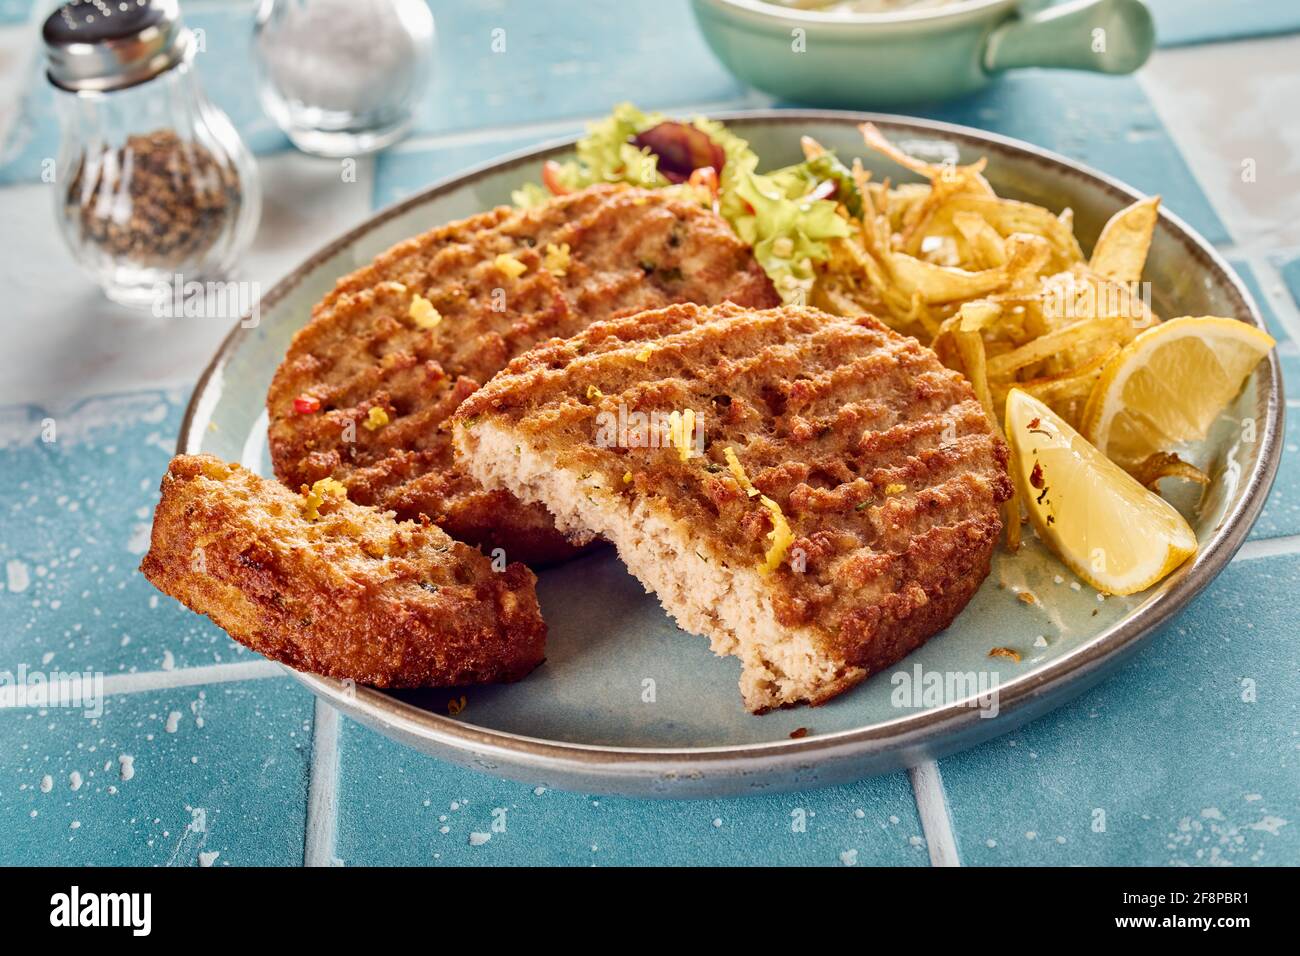 Closeup of appetizing homemade grilled fish patties with cut piece served on plate with fries and fresh lemon and lettuce Stock Photo